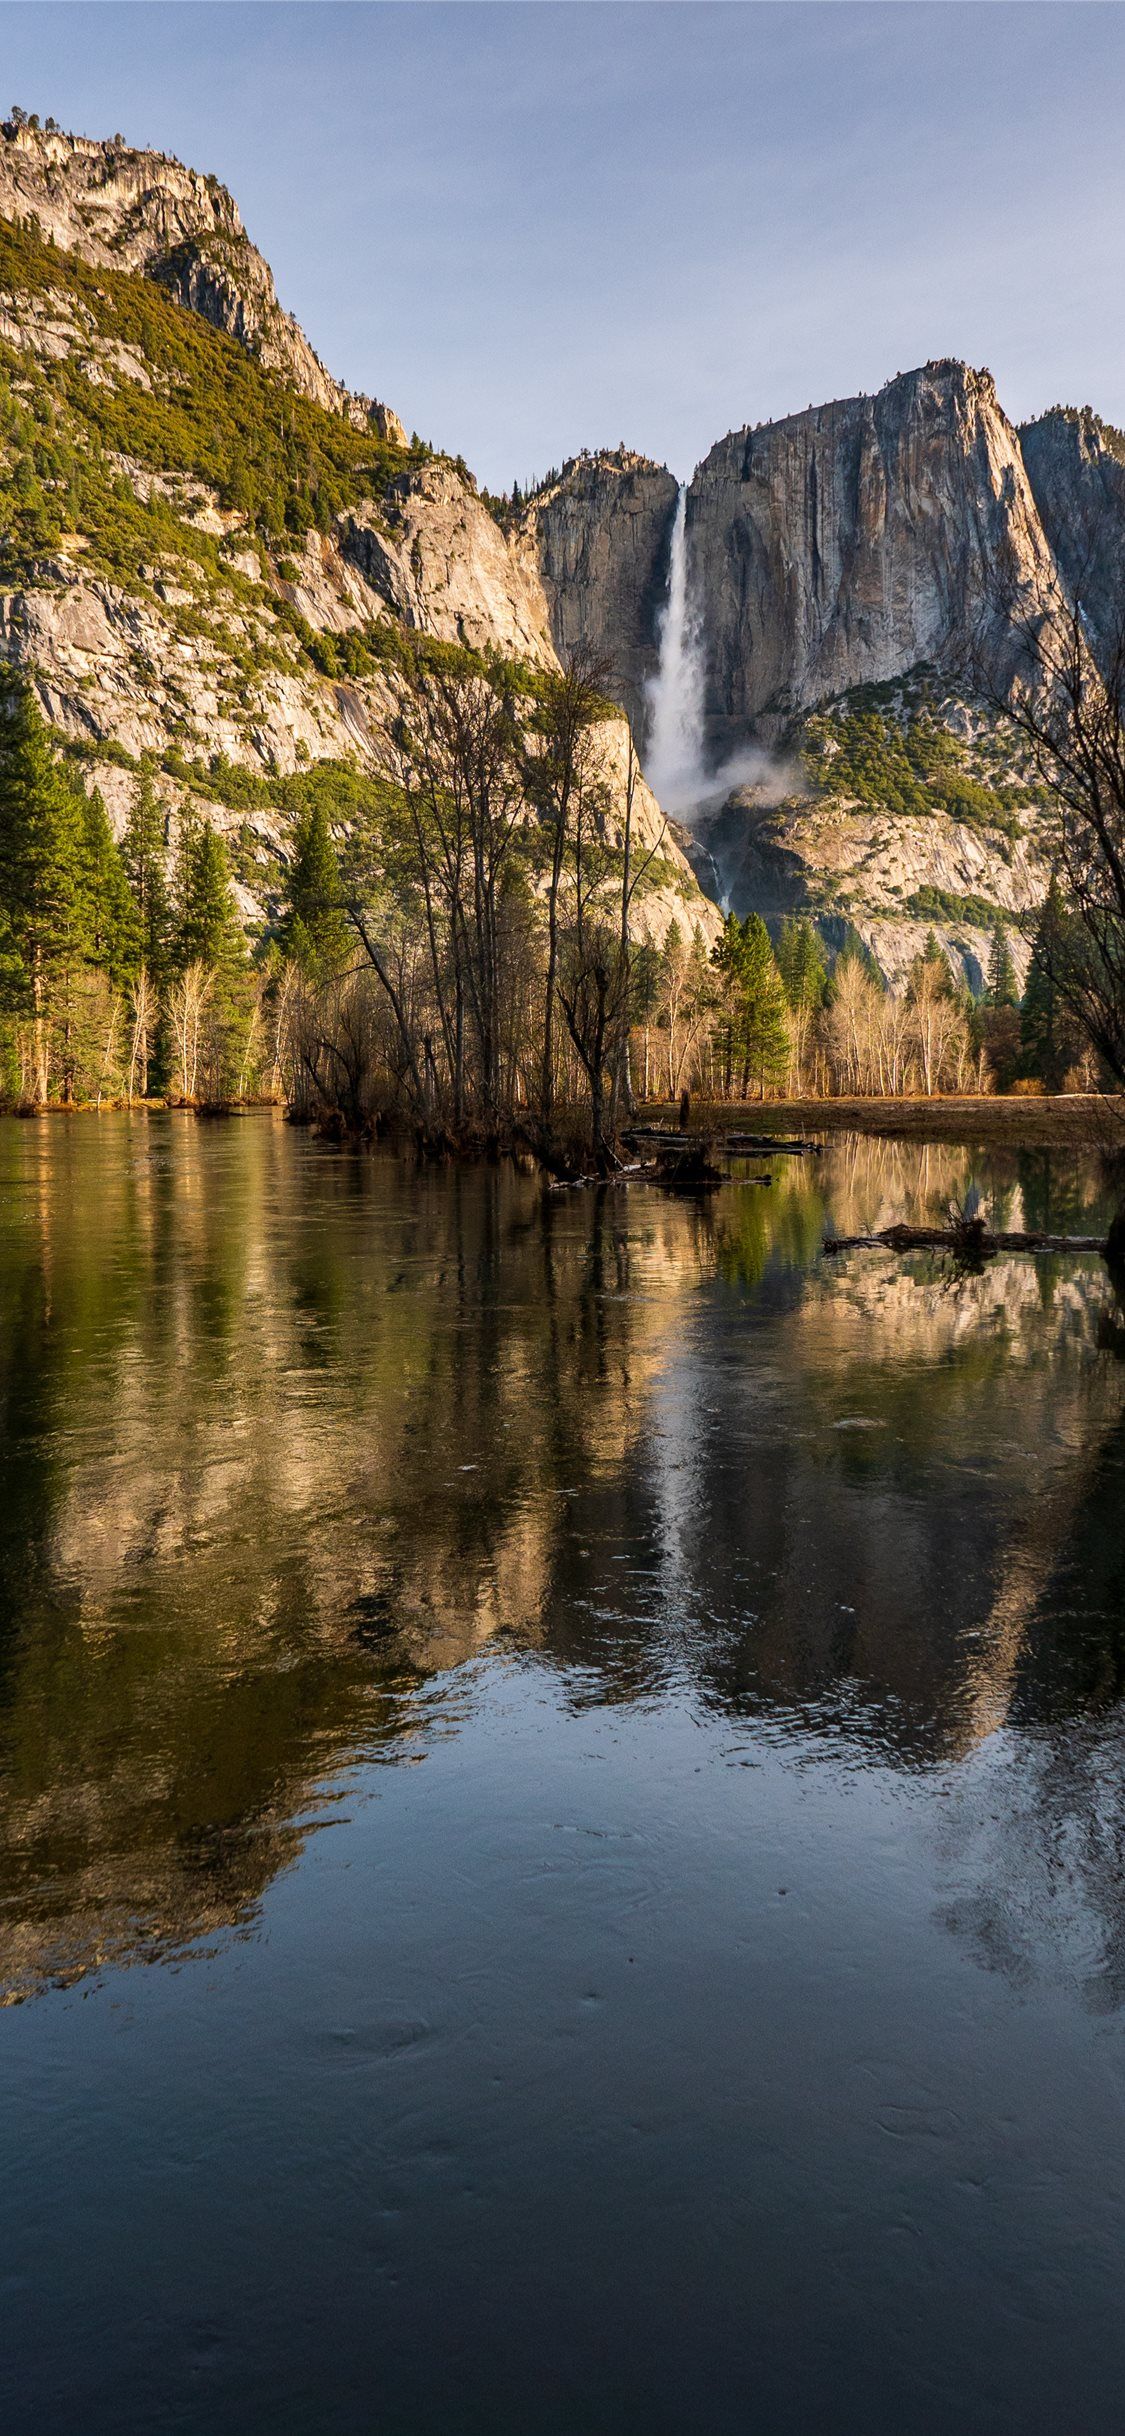 The reflection of Yosemite Falls appears in spring. iPhone X Wallpaper Free Download